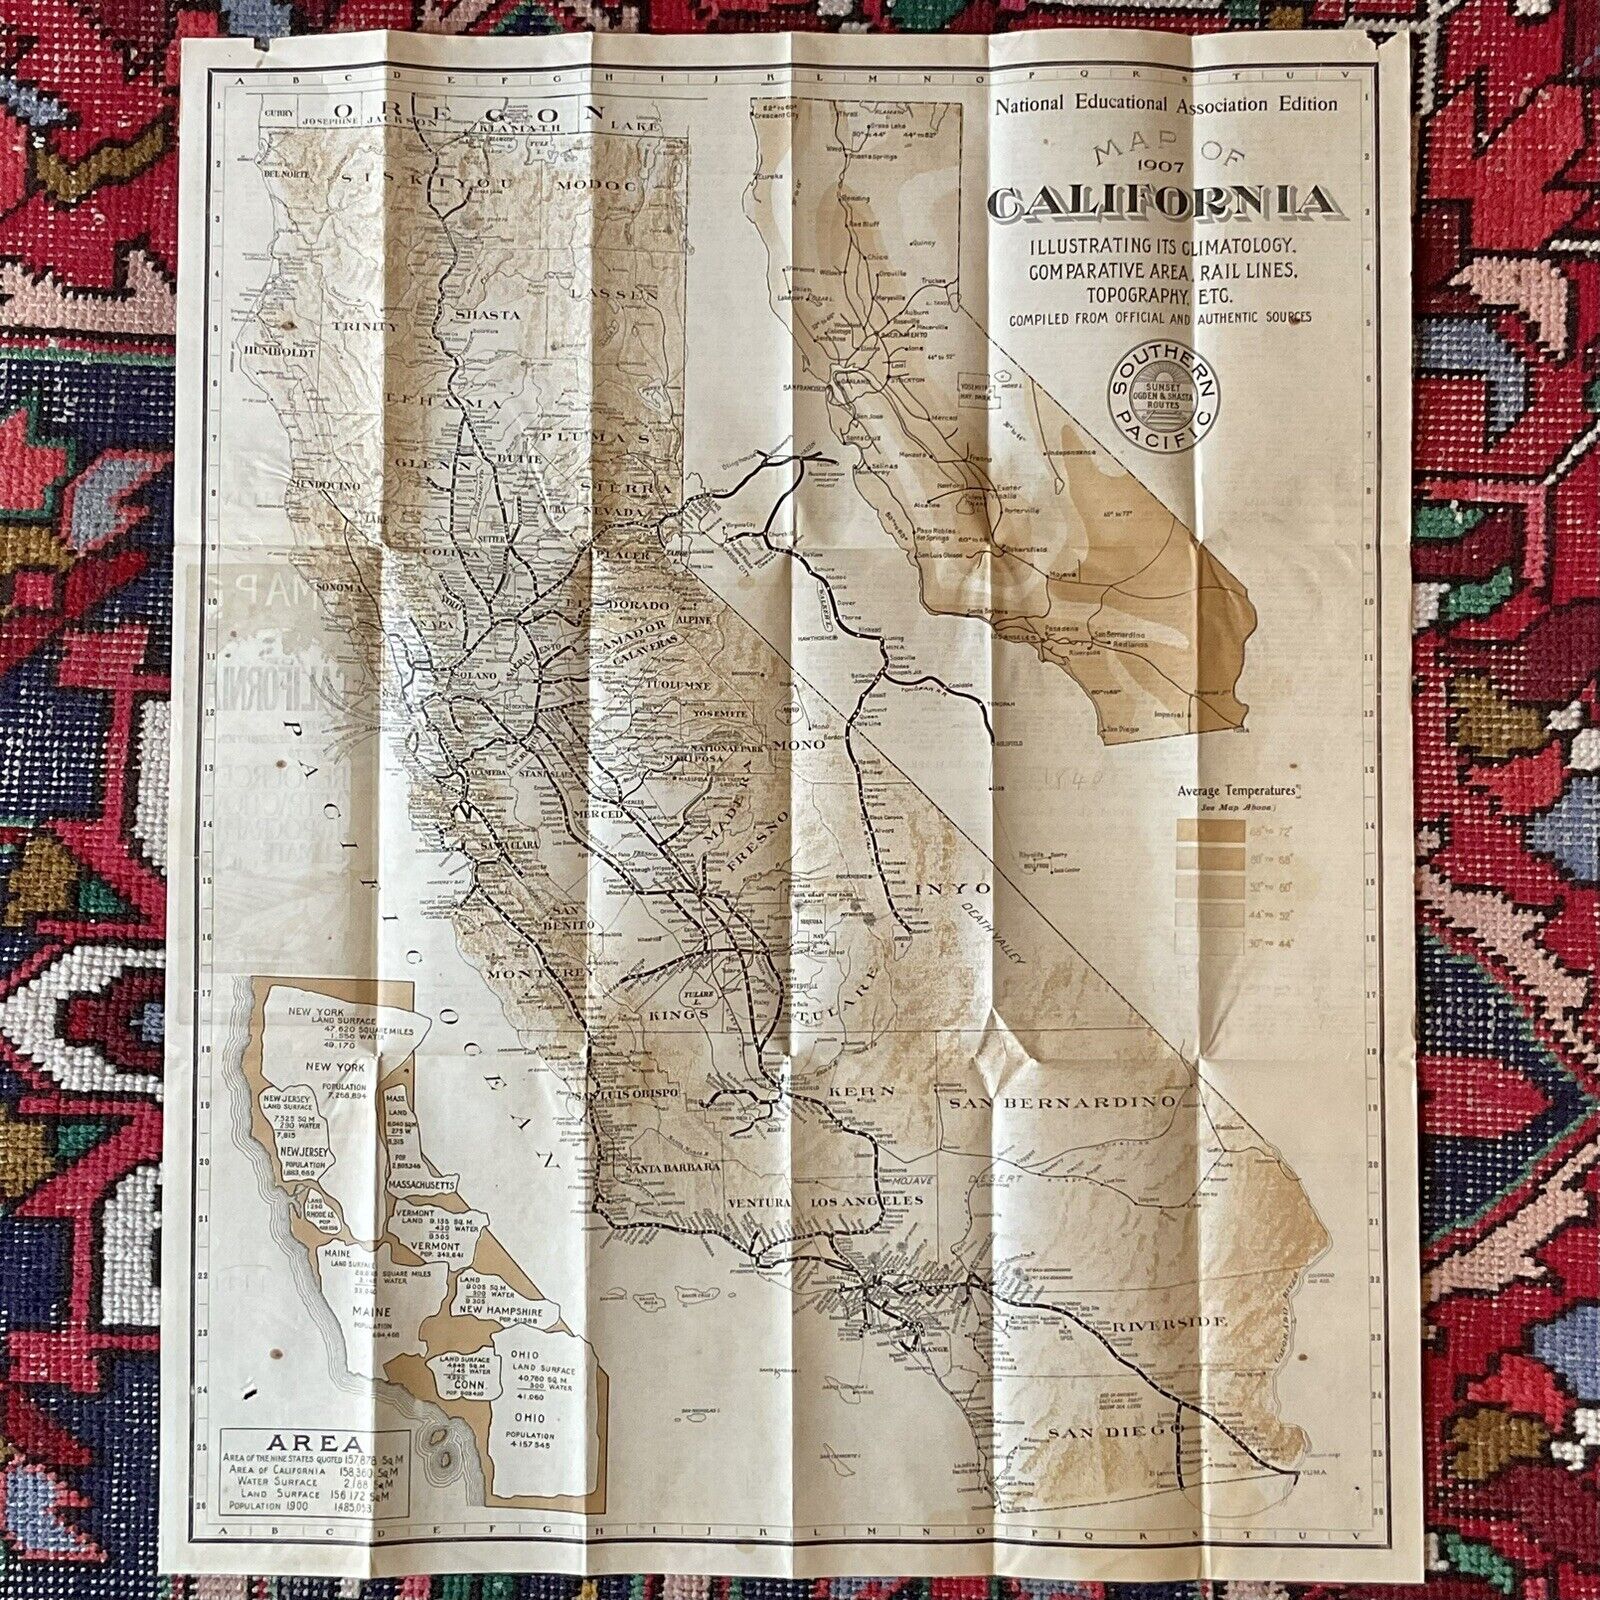 1907 MAP OF CALIFORNIA FOLDOUT VTG BROCHURE 27”X 22” SOUTHERN PACIFIC RAILROAD